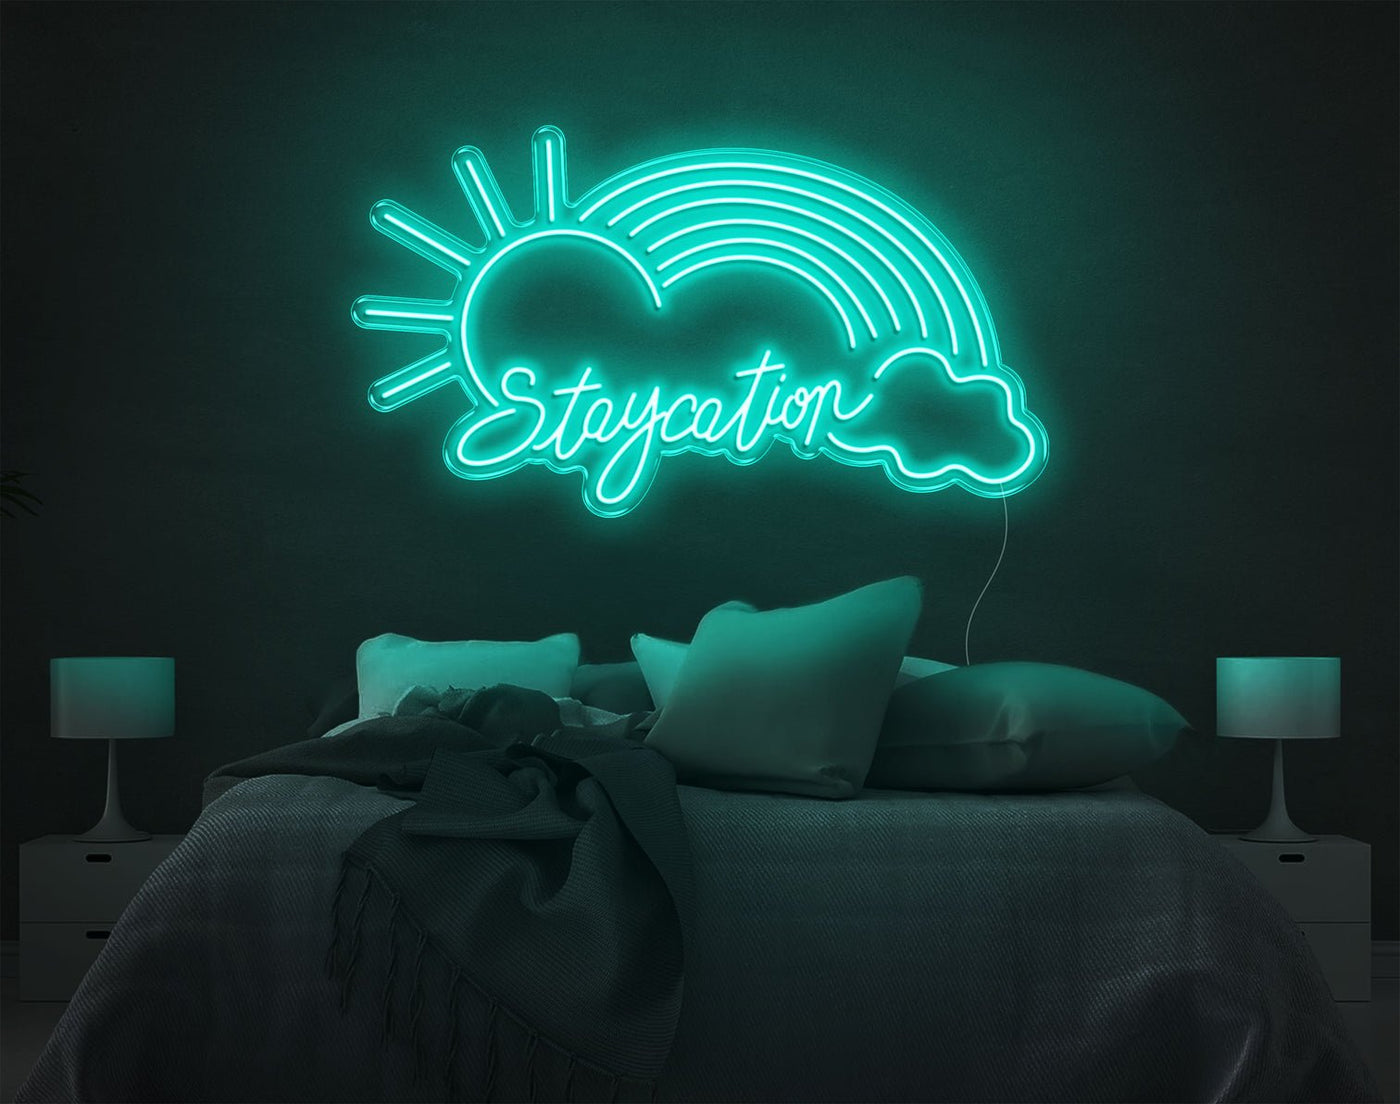 Staycation Rainbow LED Neon Sign - 23inch x 41inchTurquoise